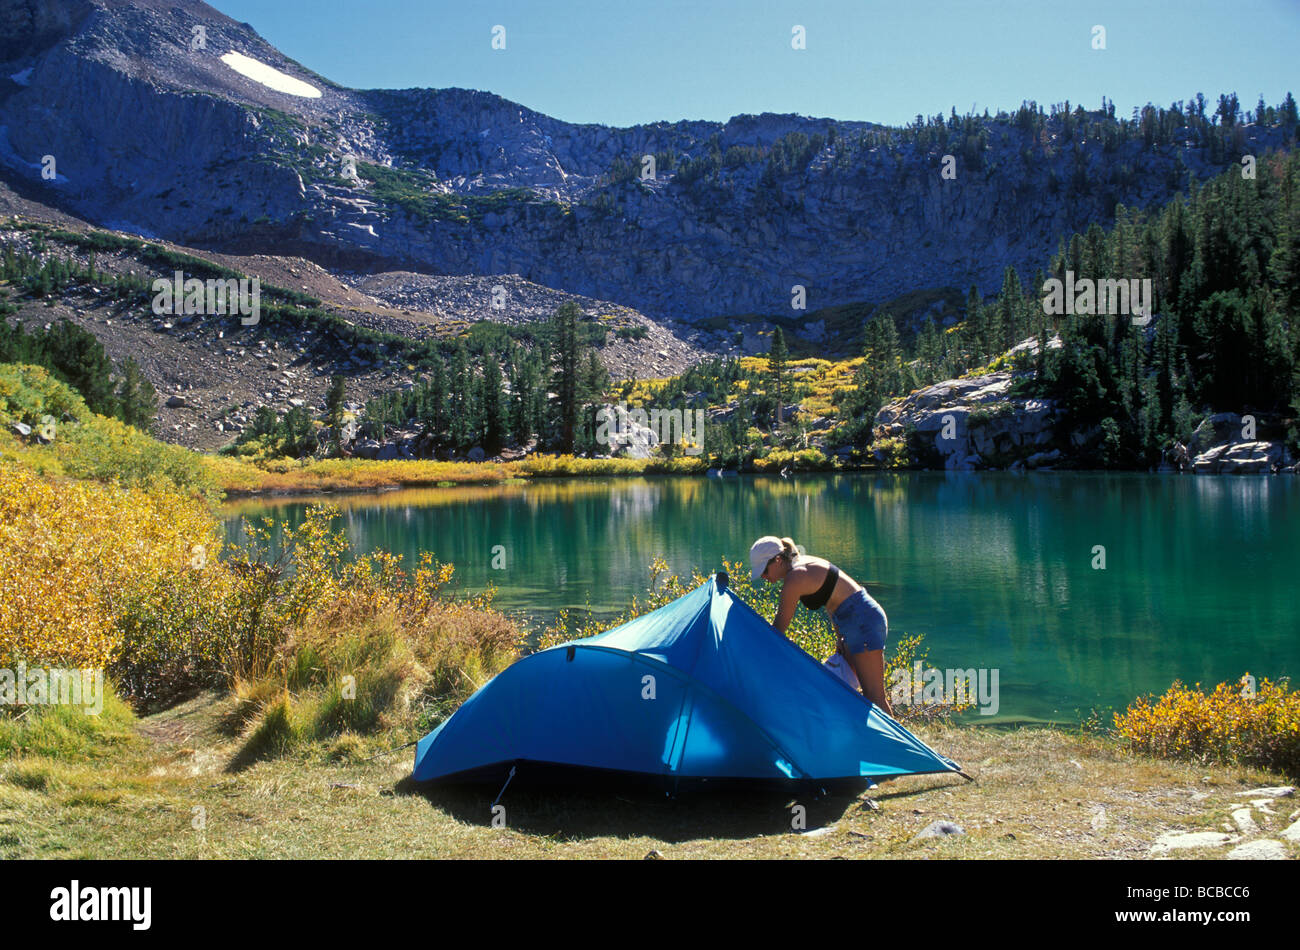 Camping at Laurel Lake in the high Sierra, Inyo National Forest. Stock Photo